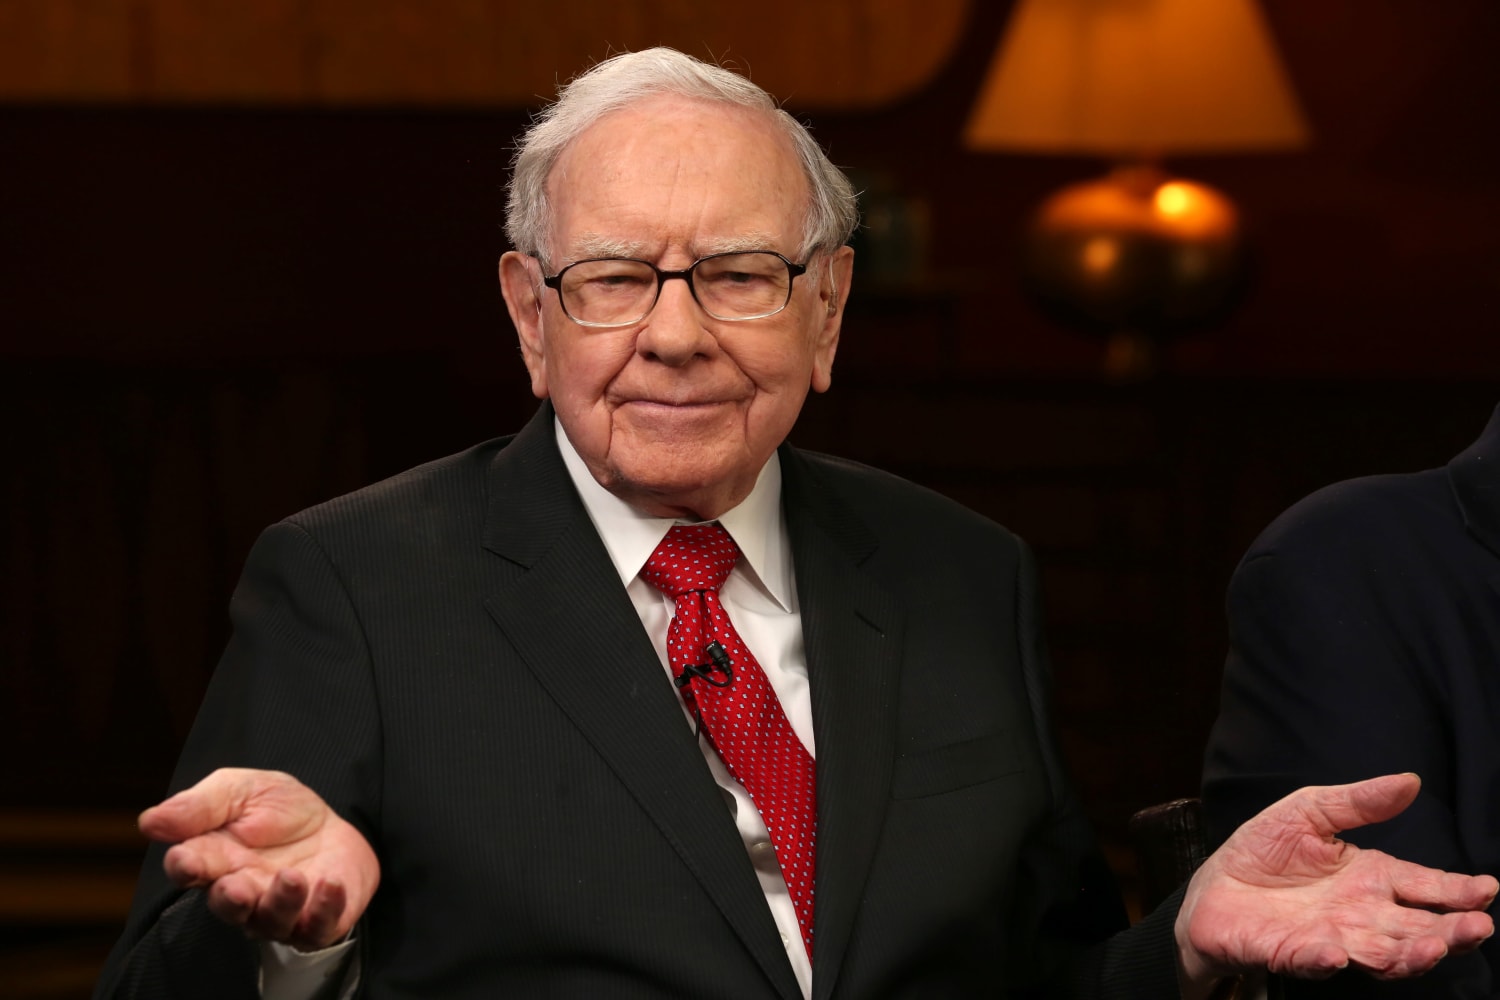 Buffett on why he hasn't made any big investments: 'We don't see anything that attractive'